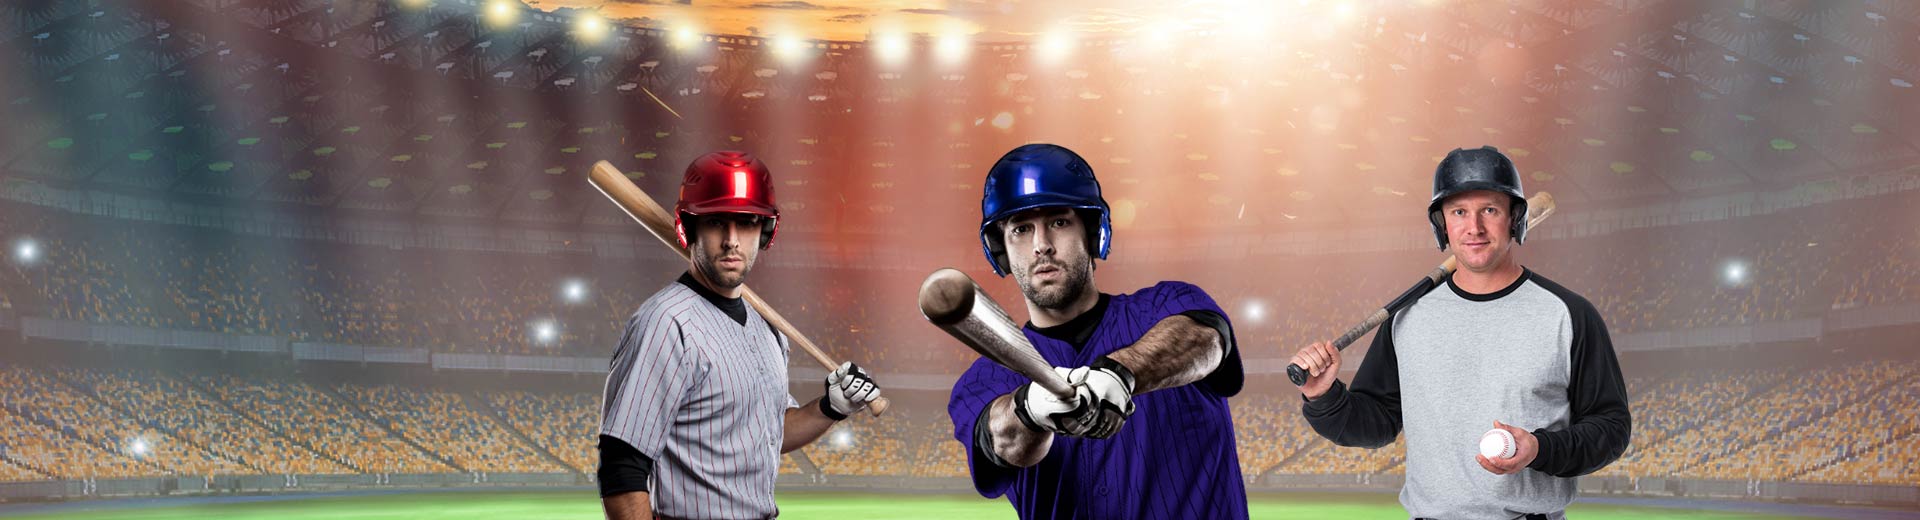 Baseball Shirts Manufacturers in Italy